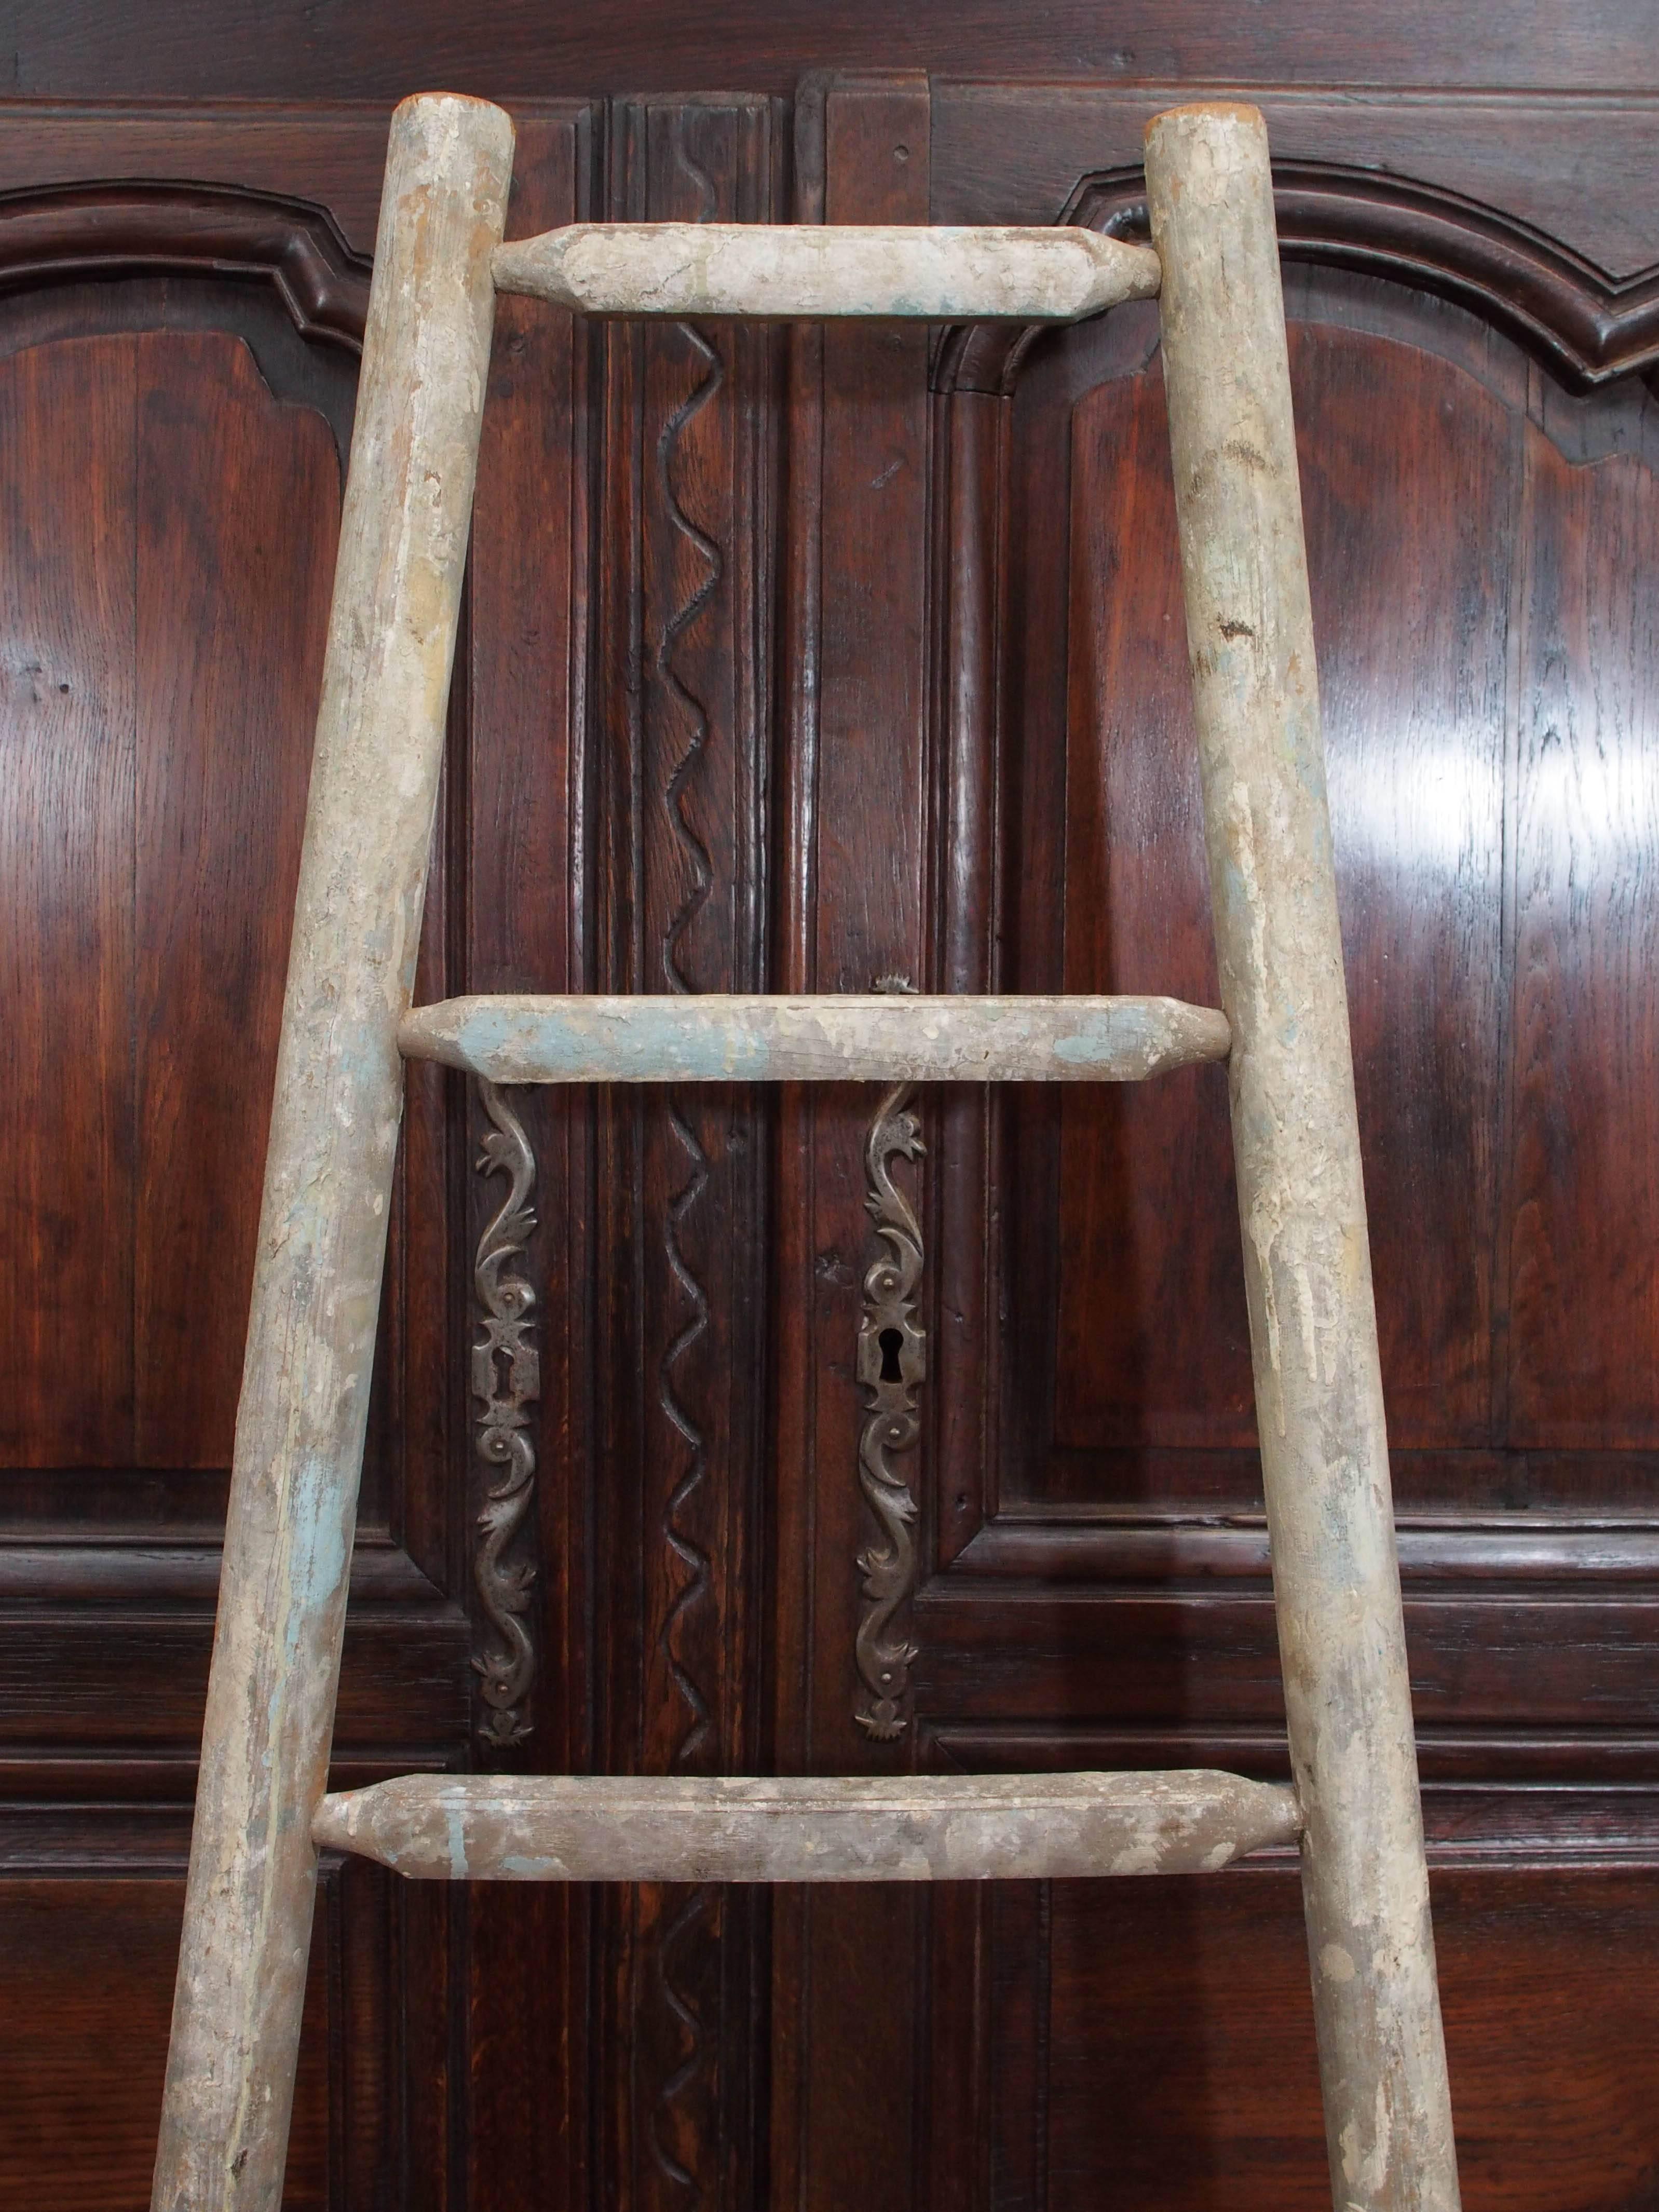 Late 19th century English handmade orchard ladder used for picking fruit.